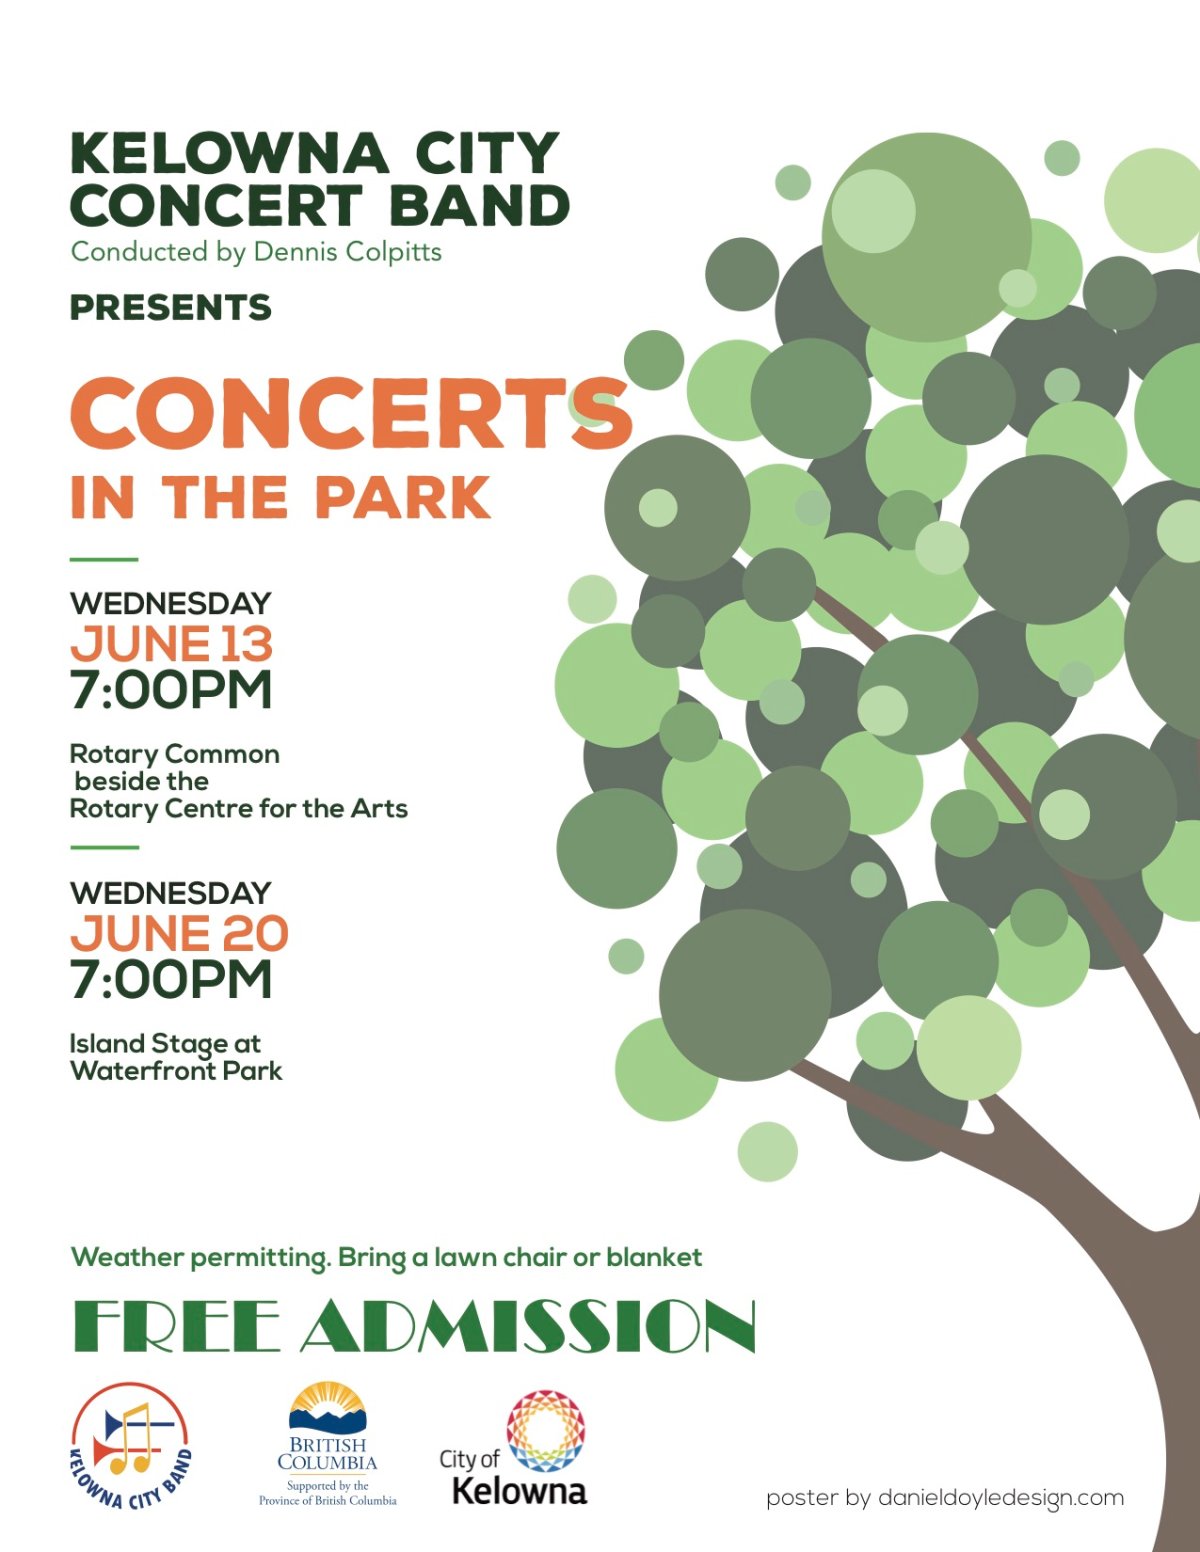 KCCB CONCERTS IN THE PARK - image